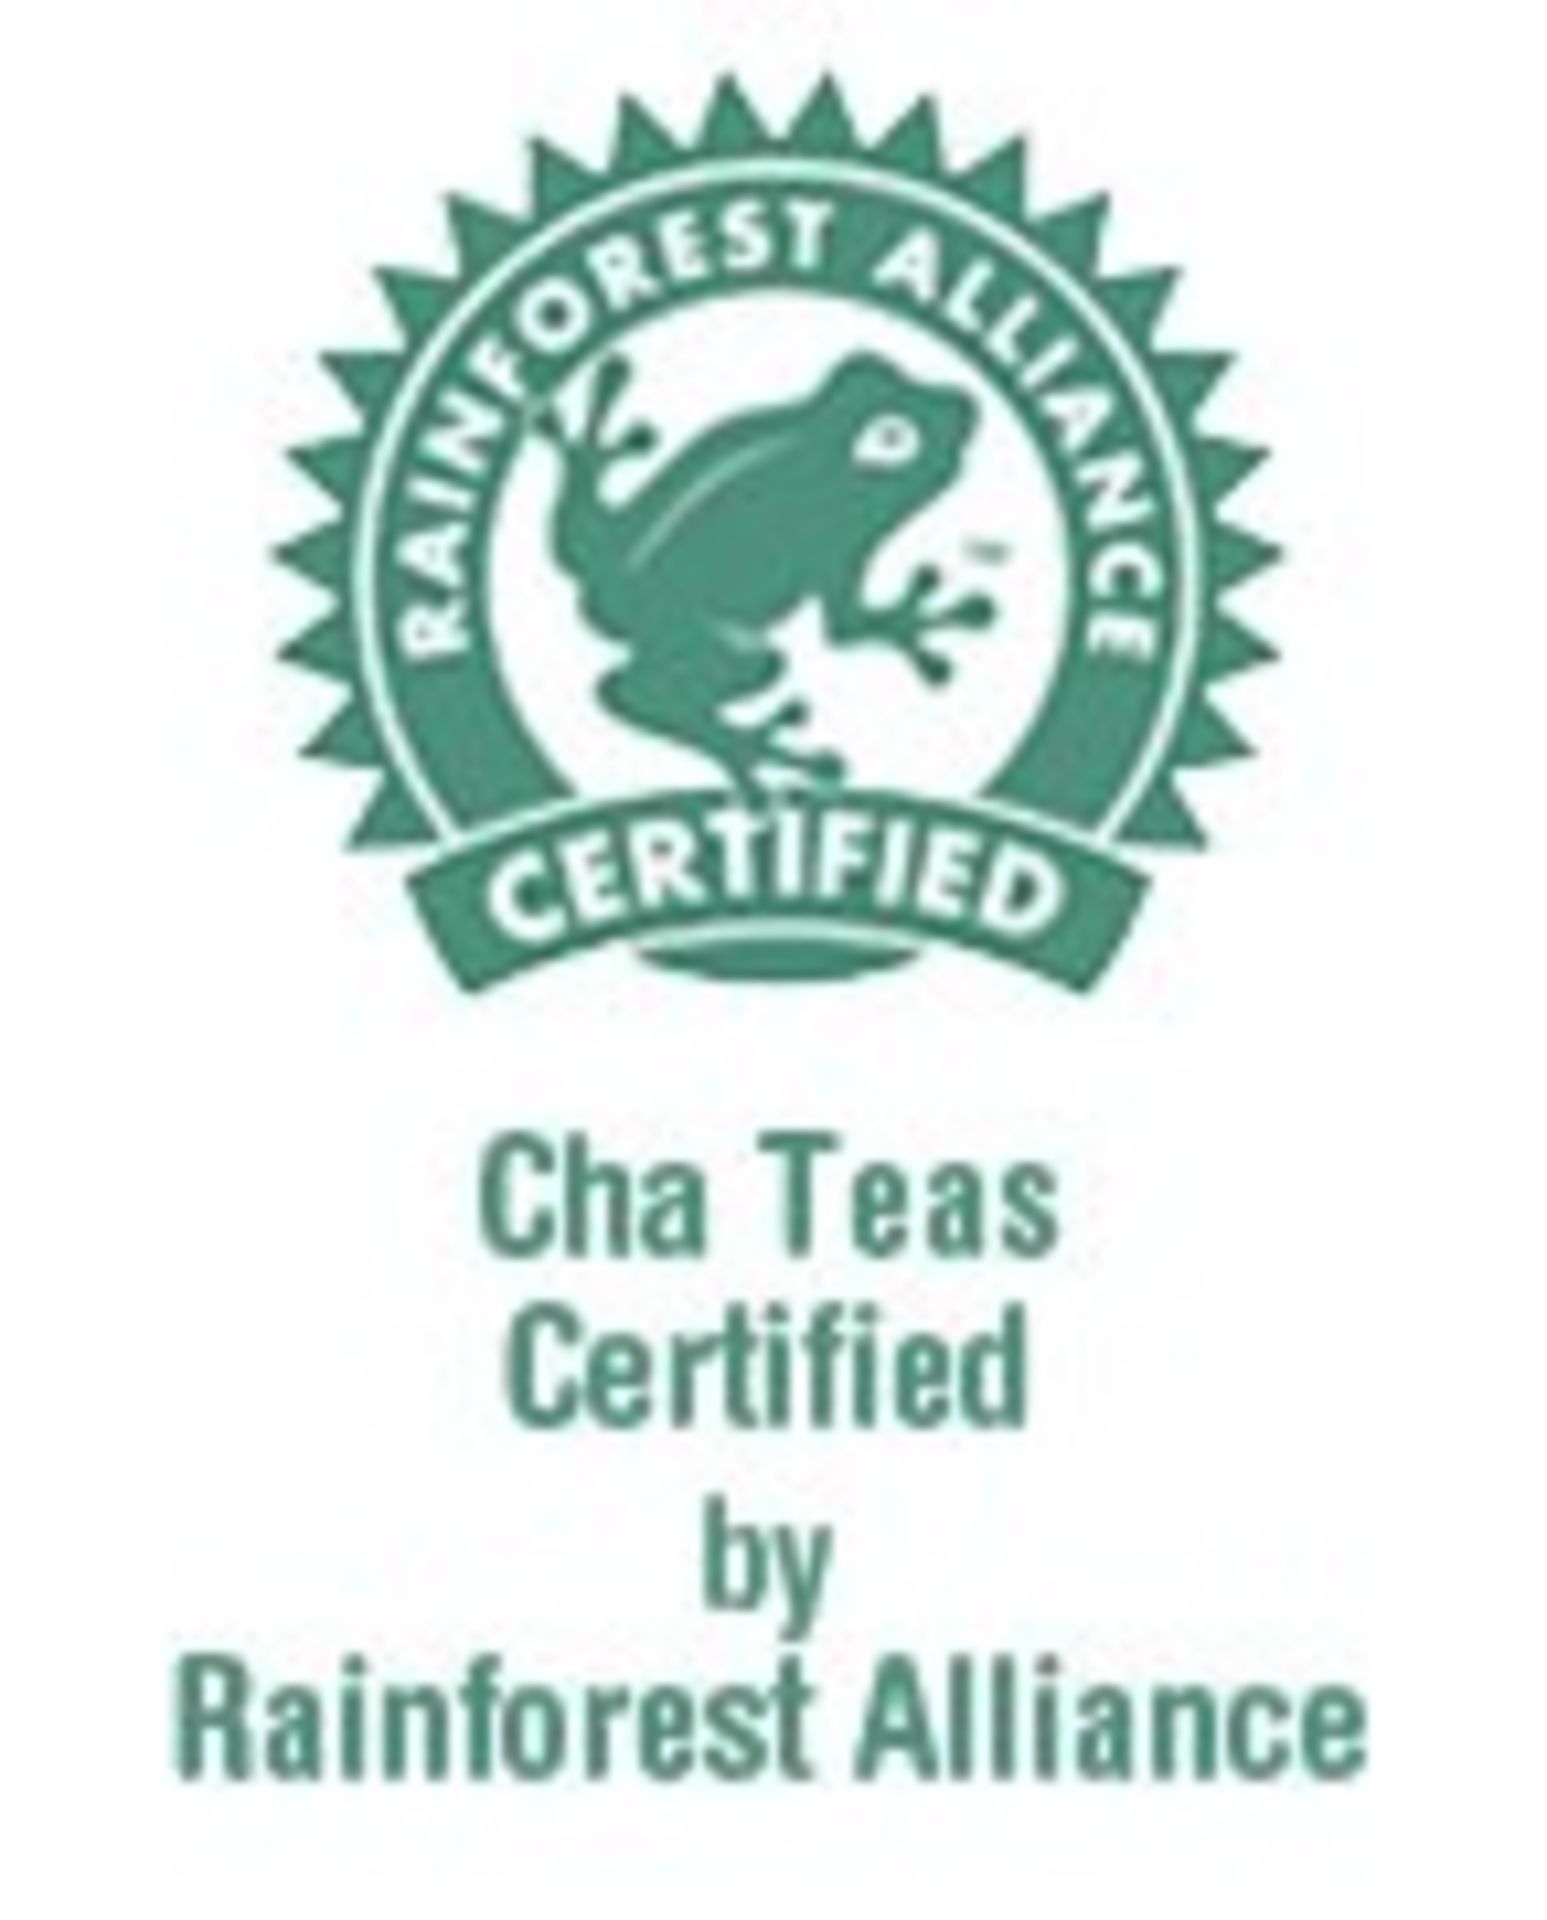 720 x Tins of CHA Organic Tea - PURE BLACK & PURE GREEN - 100% Natural and Organic - Includes 720 - Image 2 of 3